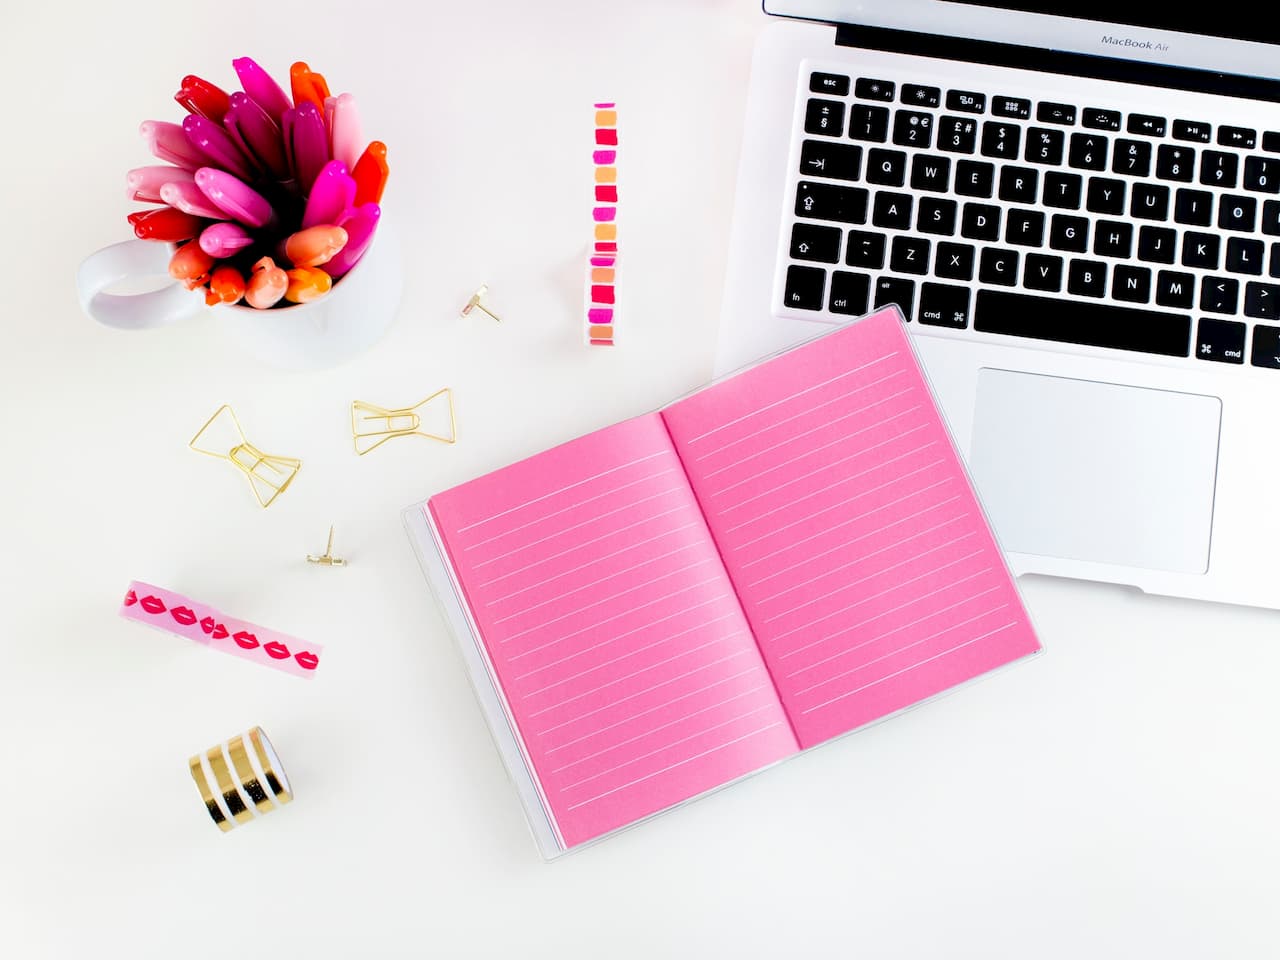 Blogging picture, pink notebook, why do you want to blog